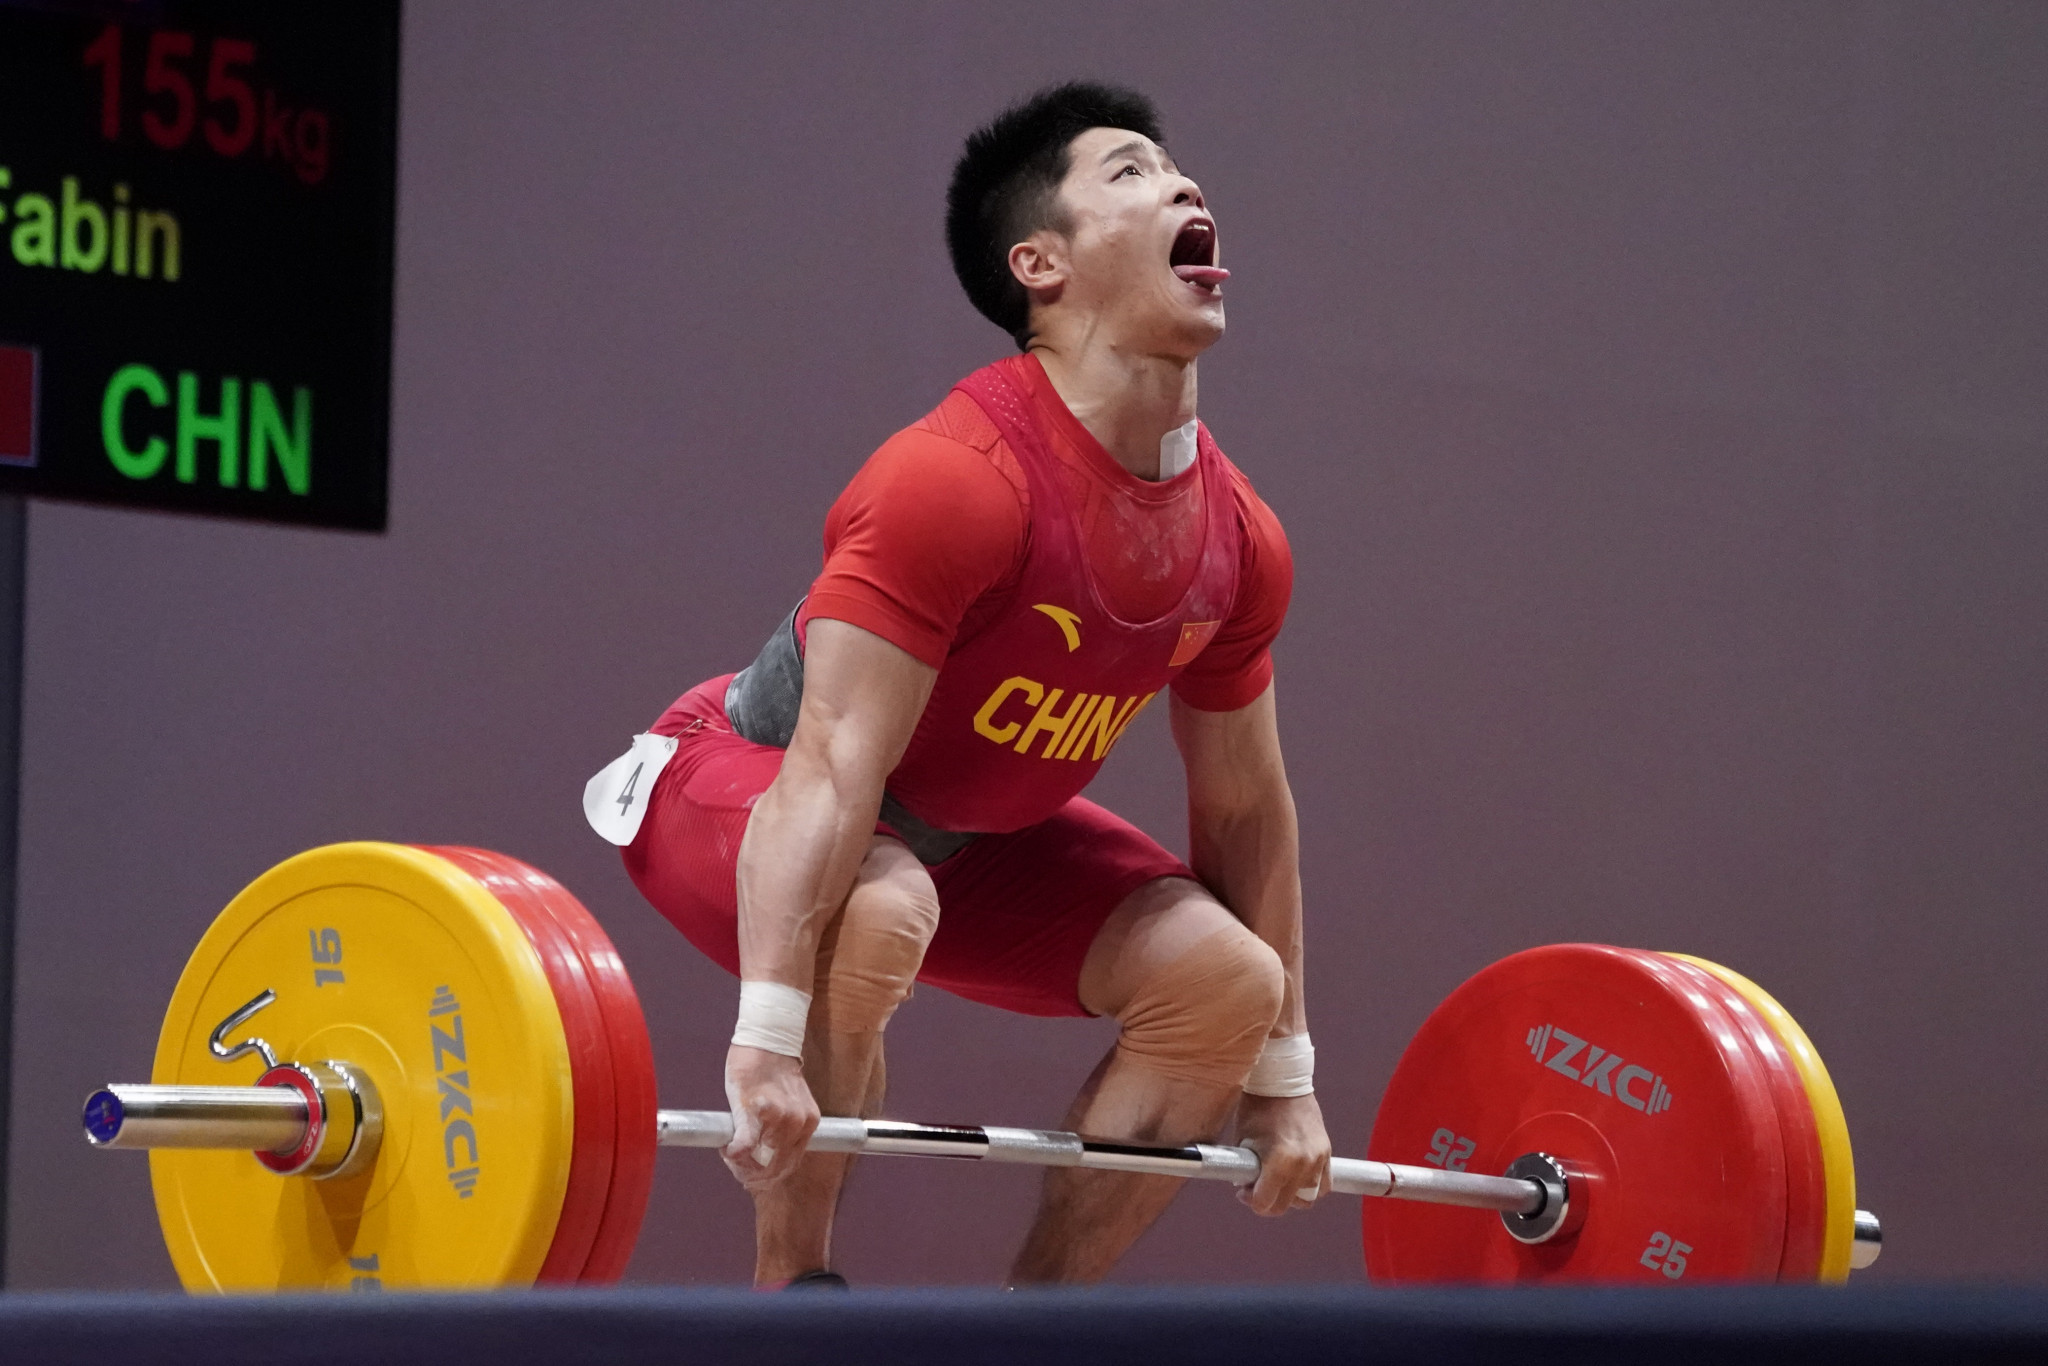 Li Fabin of China was a clear winner in the men's 61 kilograms category, but fell just short in his quest for a world record ©Getty Images